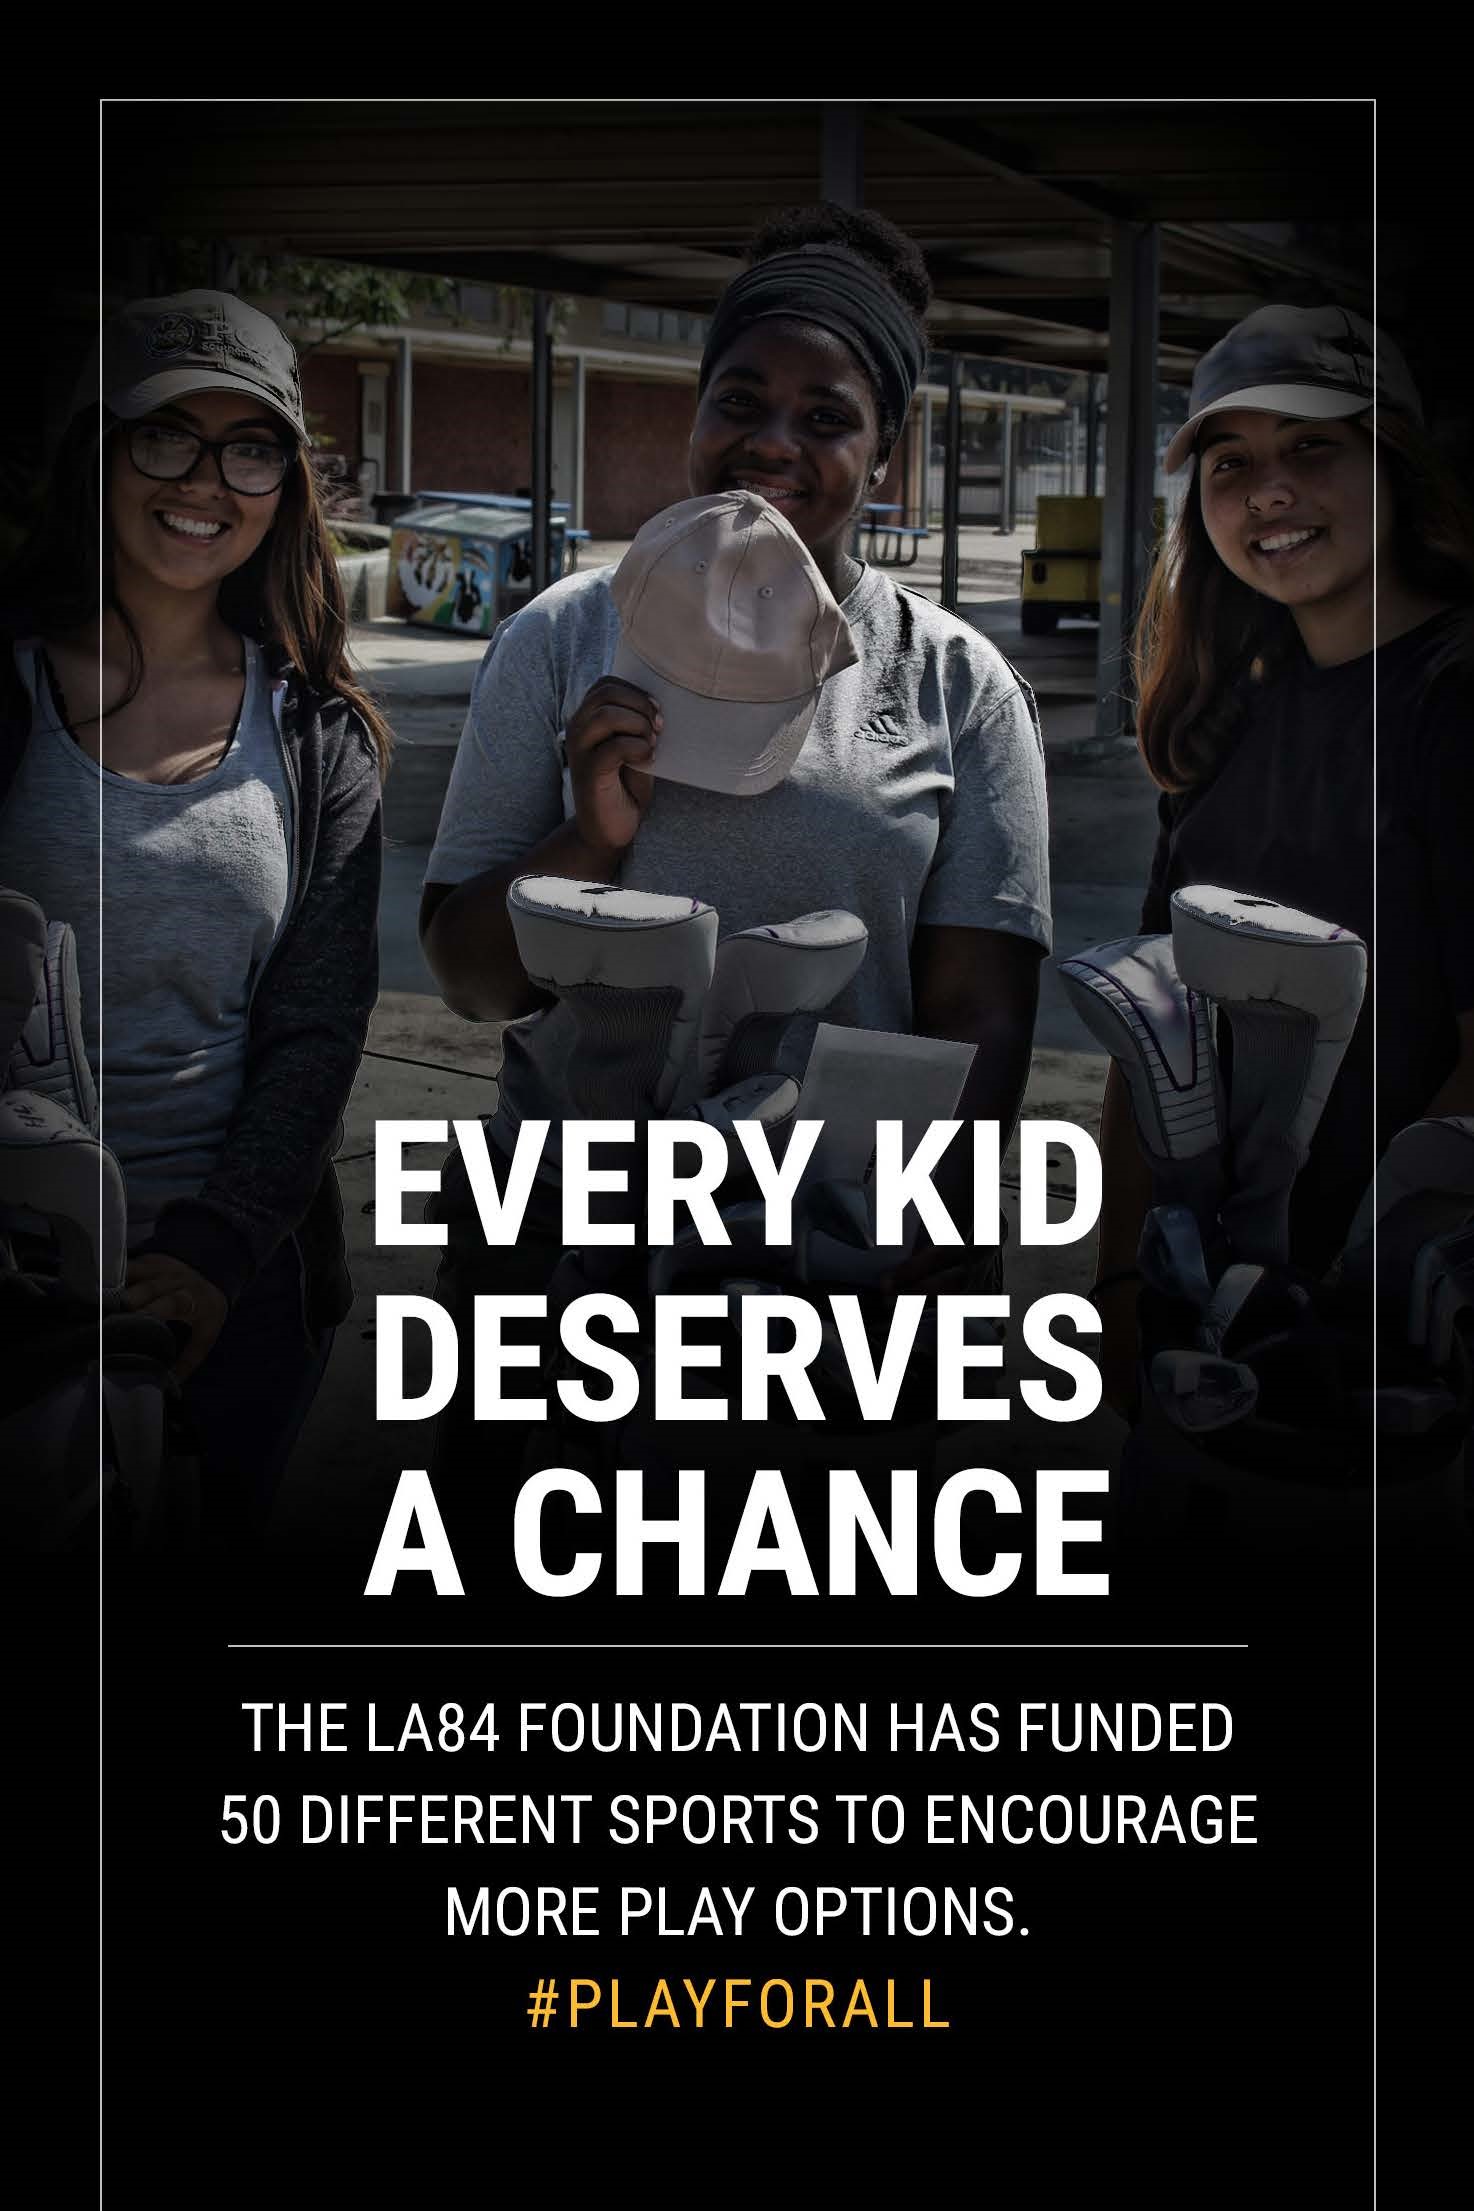 Every Kid Deserves A Chance 10-15-17 website